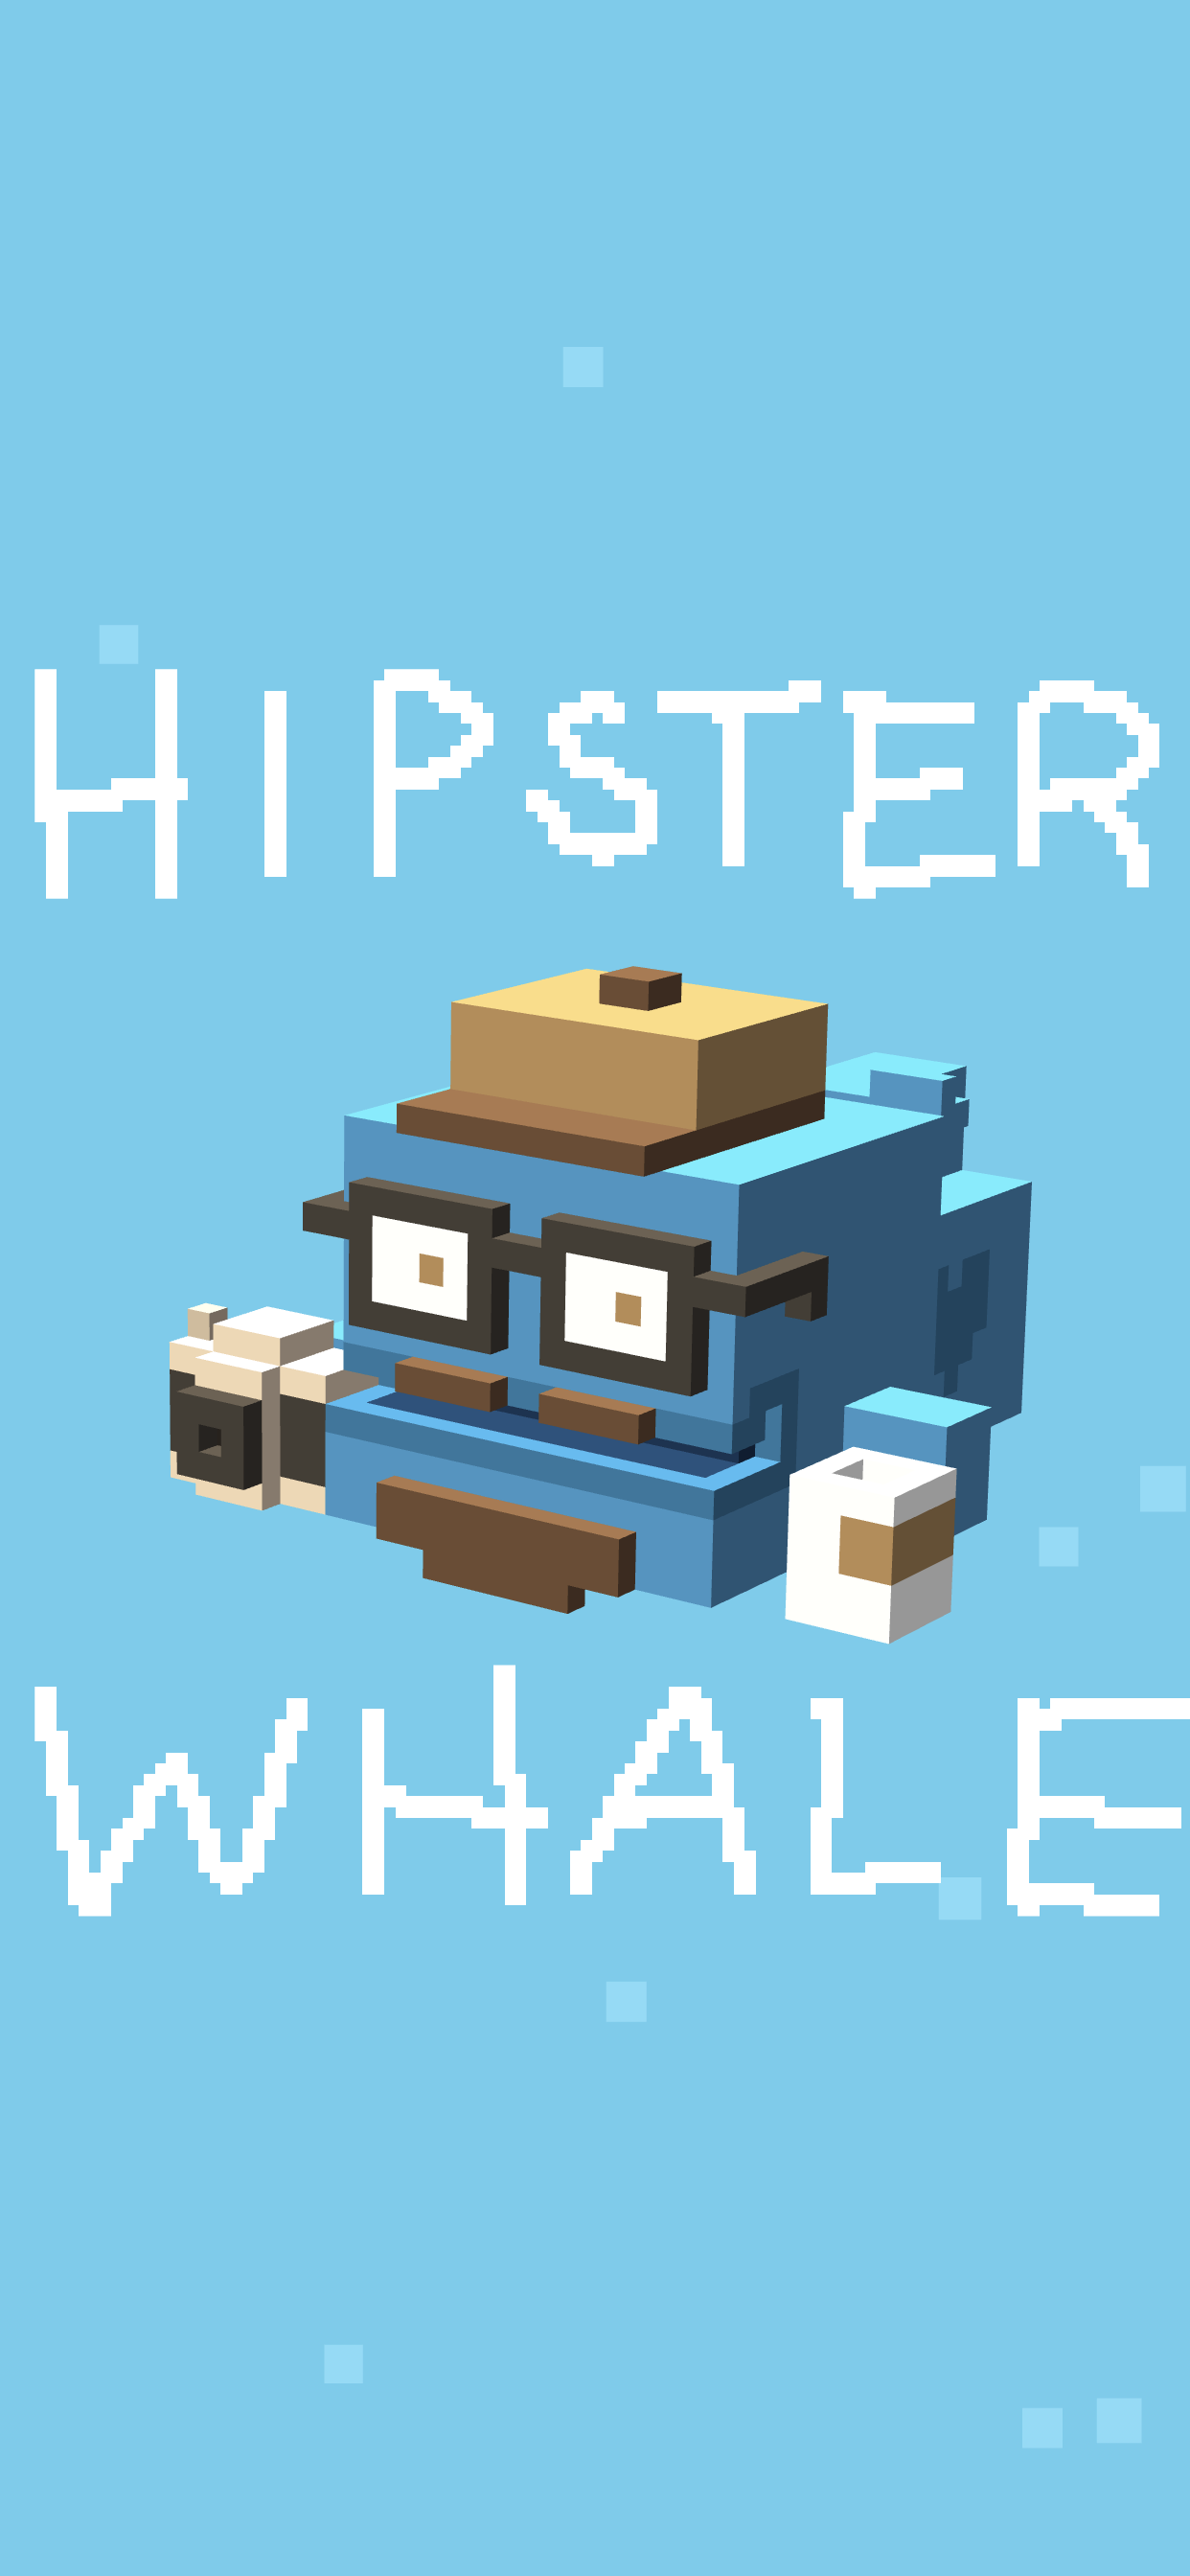 Hipster Whale wallpaper. Crossy road, Game picture, Hipster